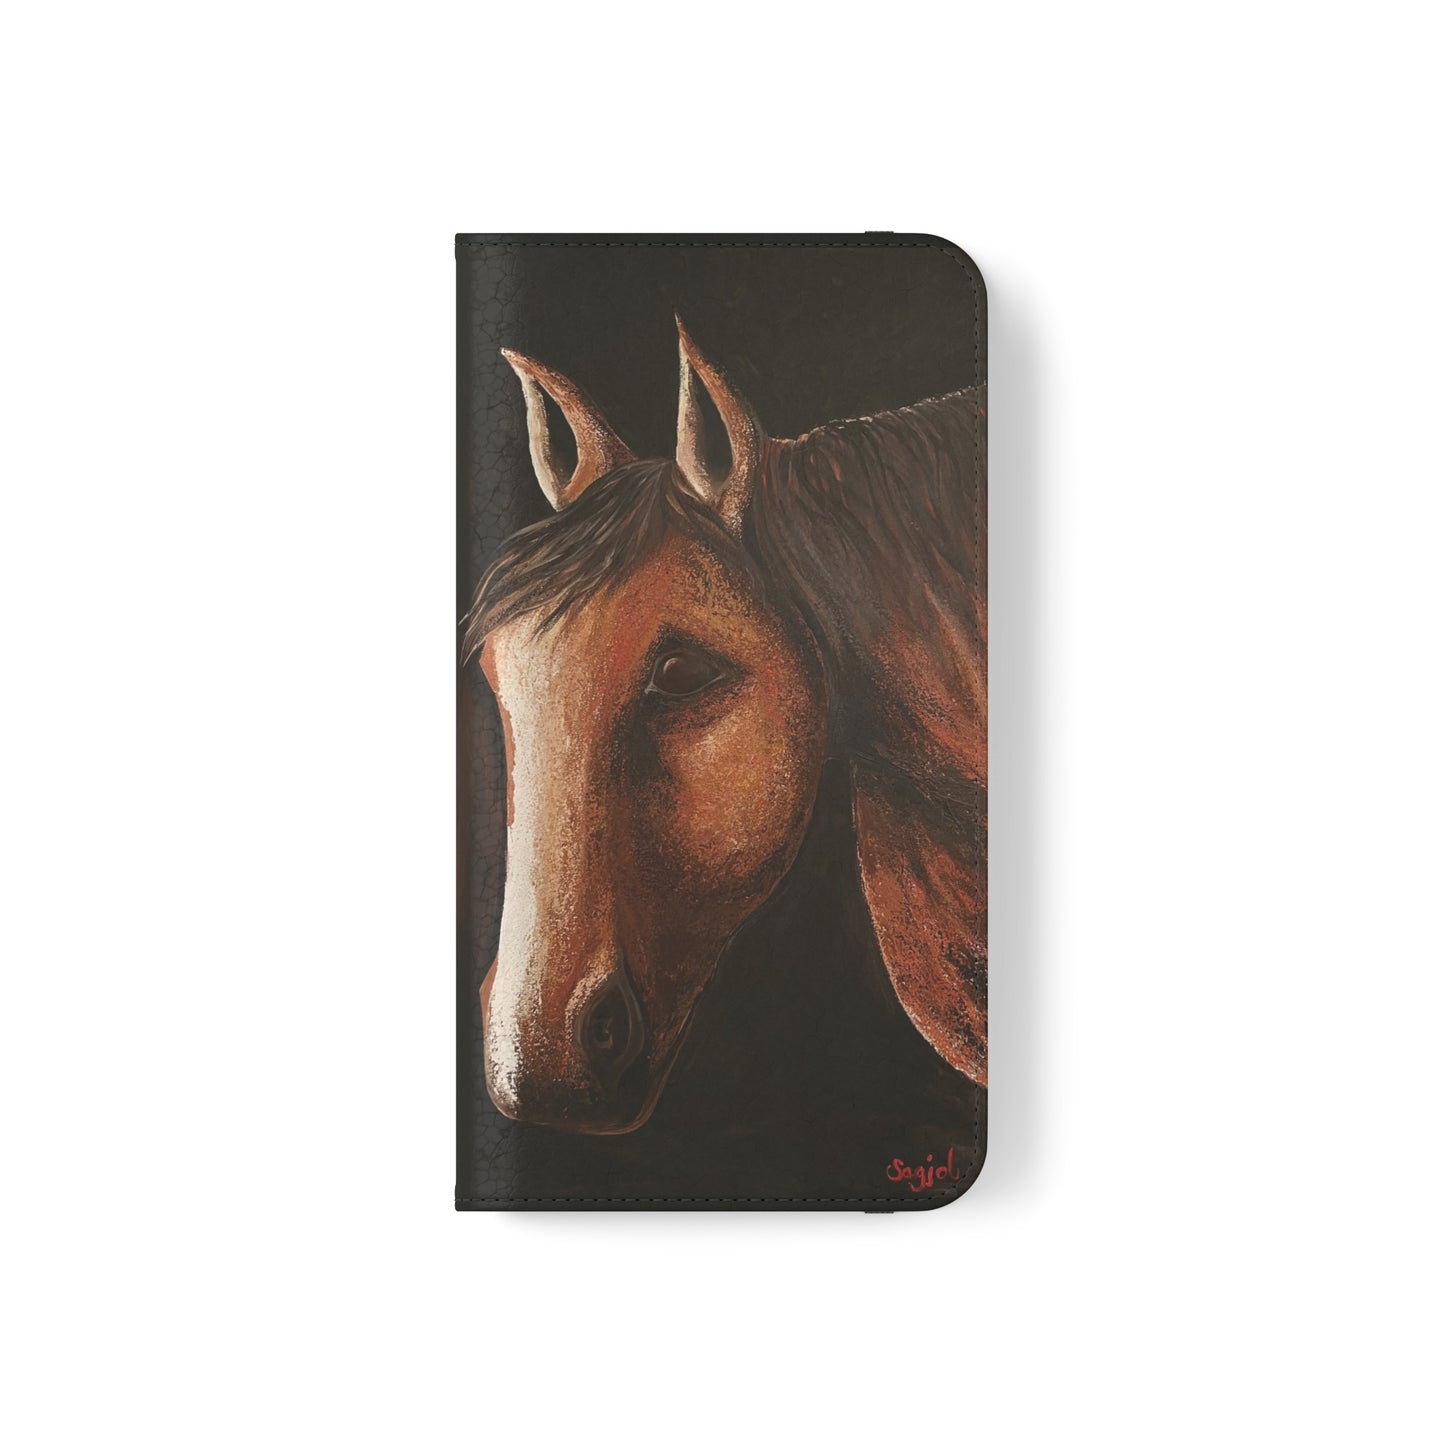 Phone Flip Cases - Wallet Phone case - Phone case with Wallet - Equestrian - Spirit